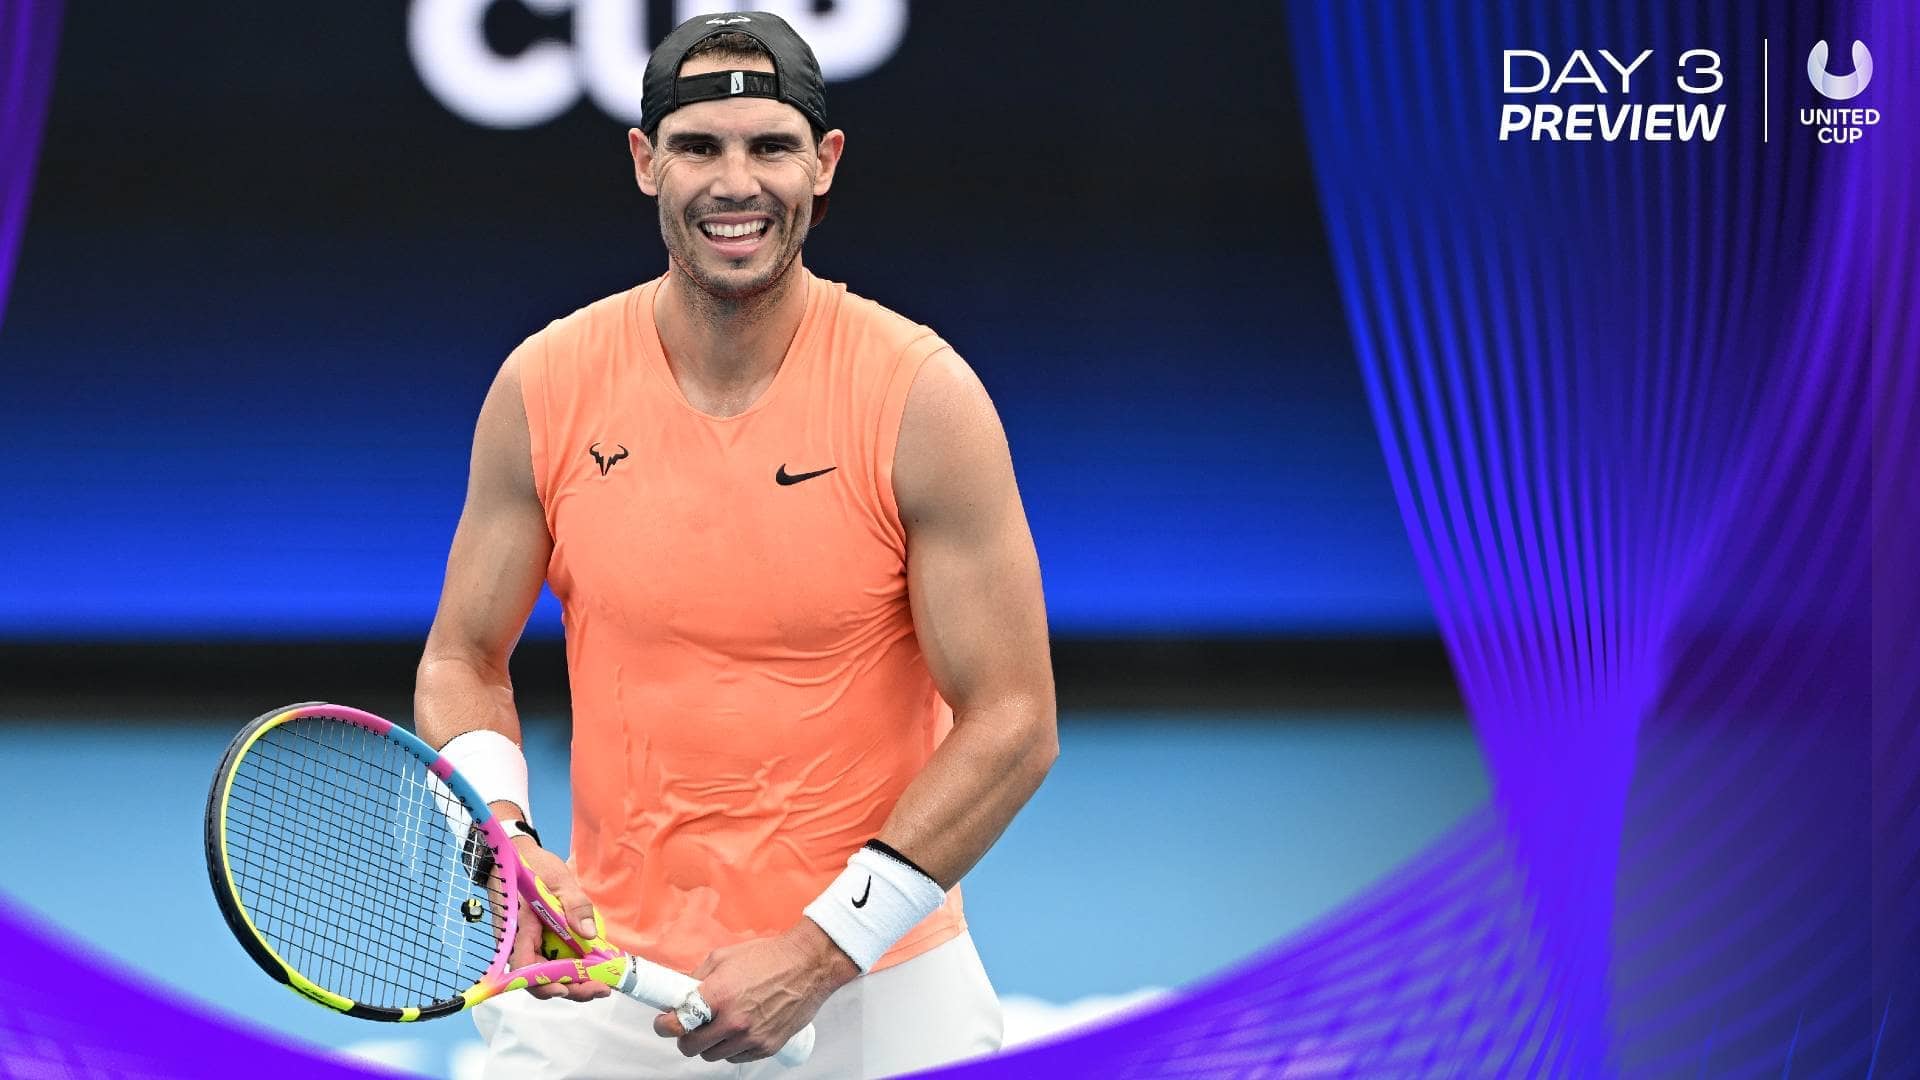 Rafael Nadal and Team Spain open their United Cup campaign on Saturday in Sydney.